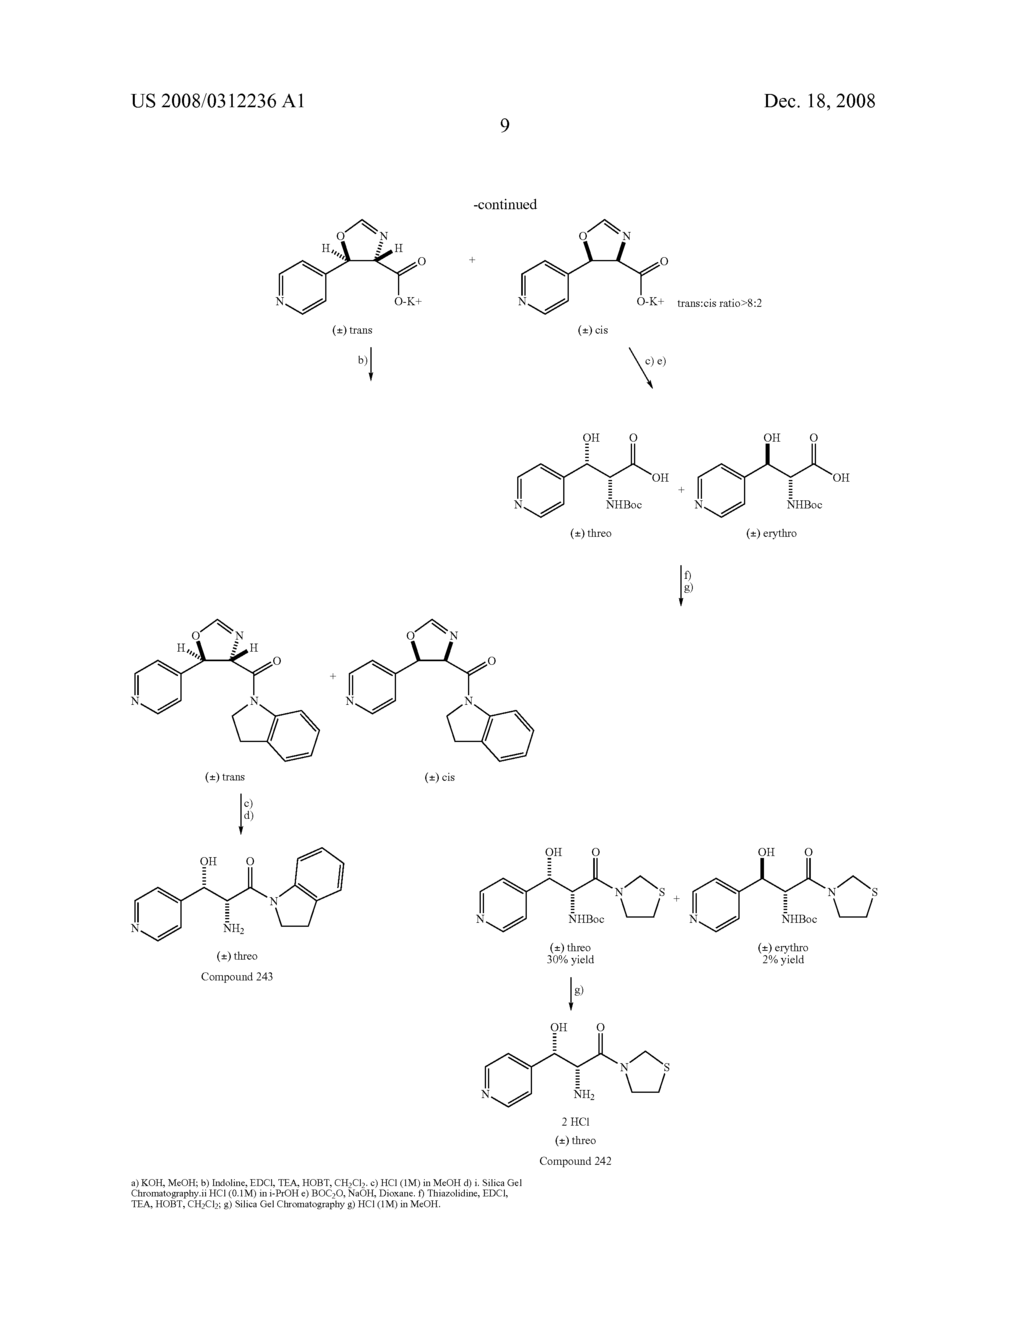 3-Heteroaryl-3-Hydroxy-2-Amino-Propyl Amines And Related Compounds Having Analgesic And/Or Immuno Stimlant Activity - diagram, schematic, and image 10